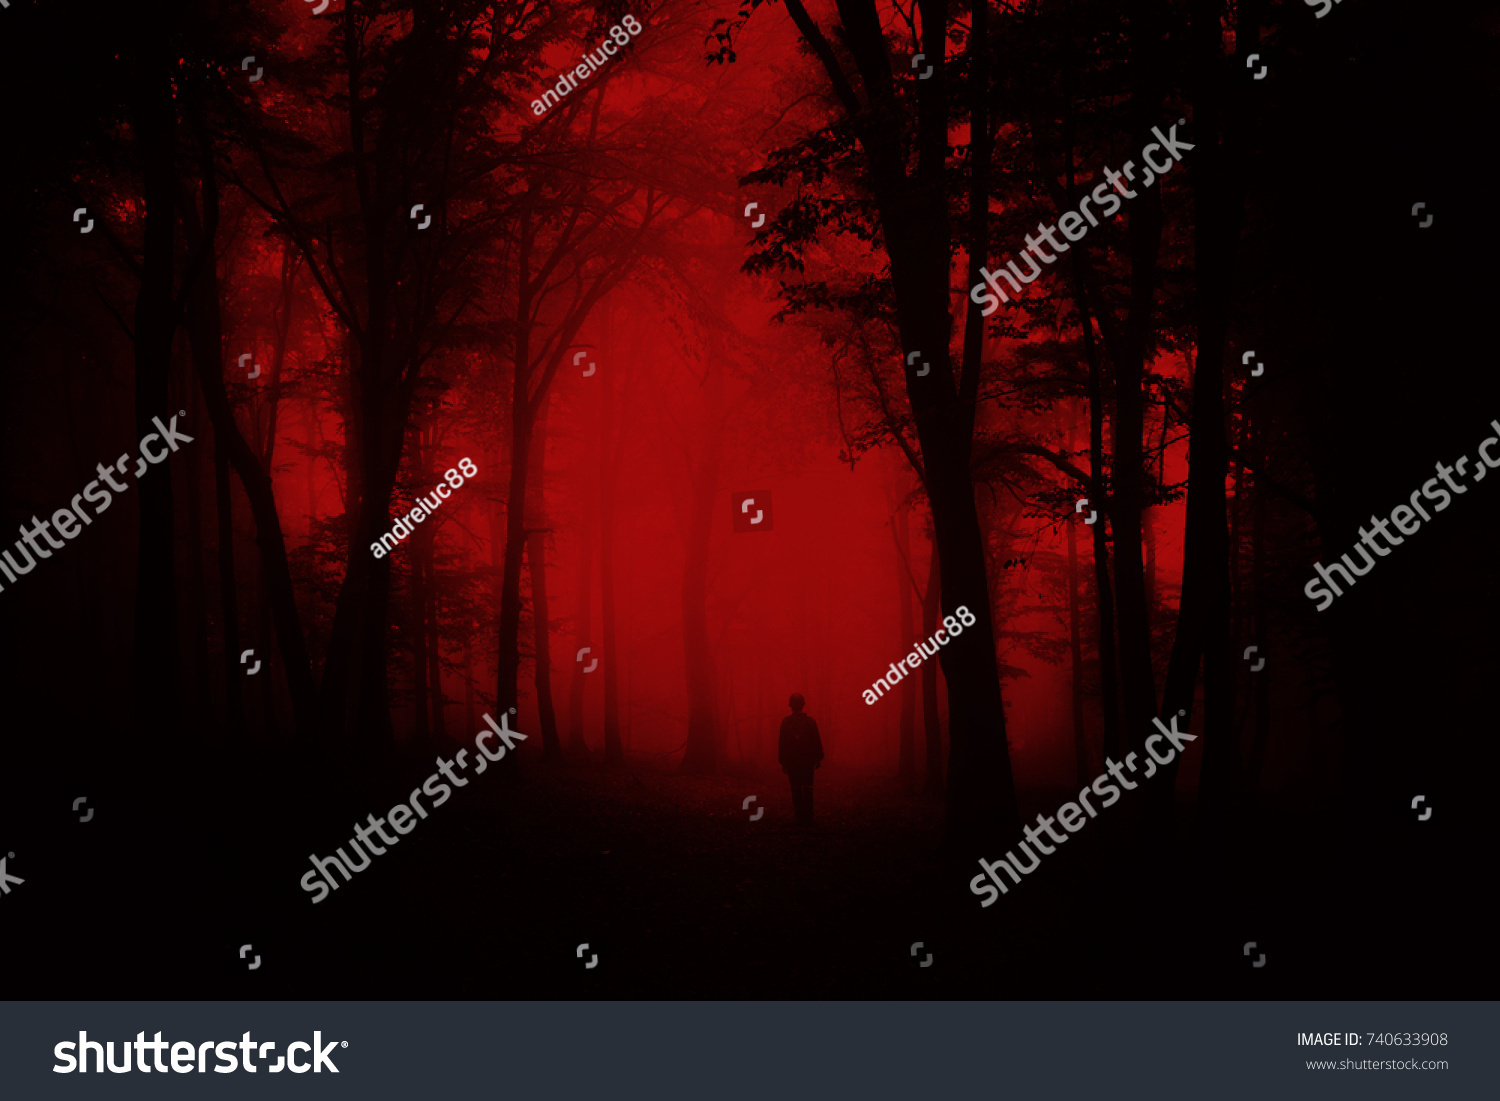 1184157 Horror Backgrounds Images Stock Photos And Vectors Shutterstock